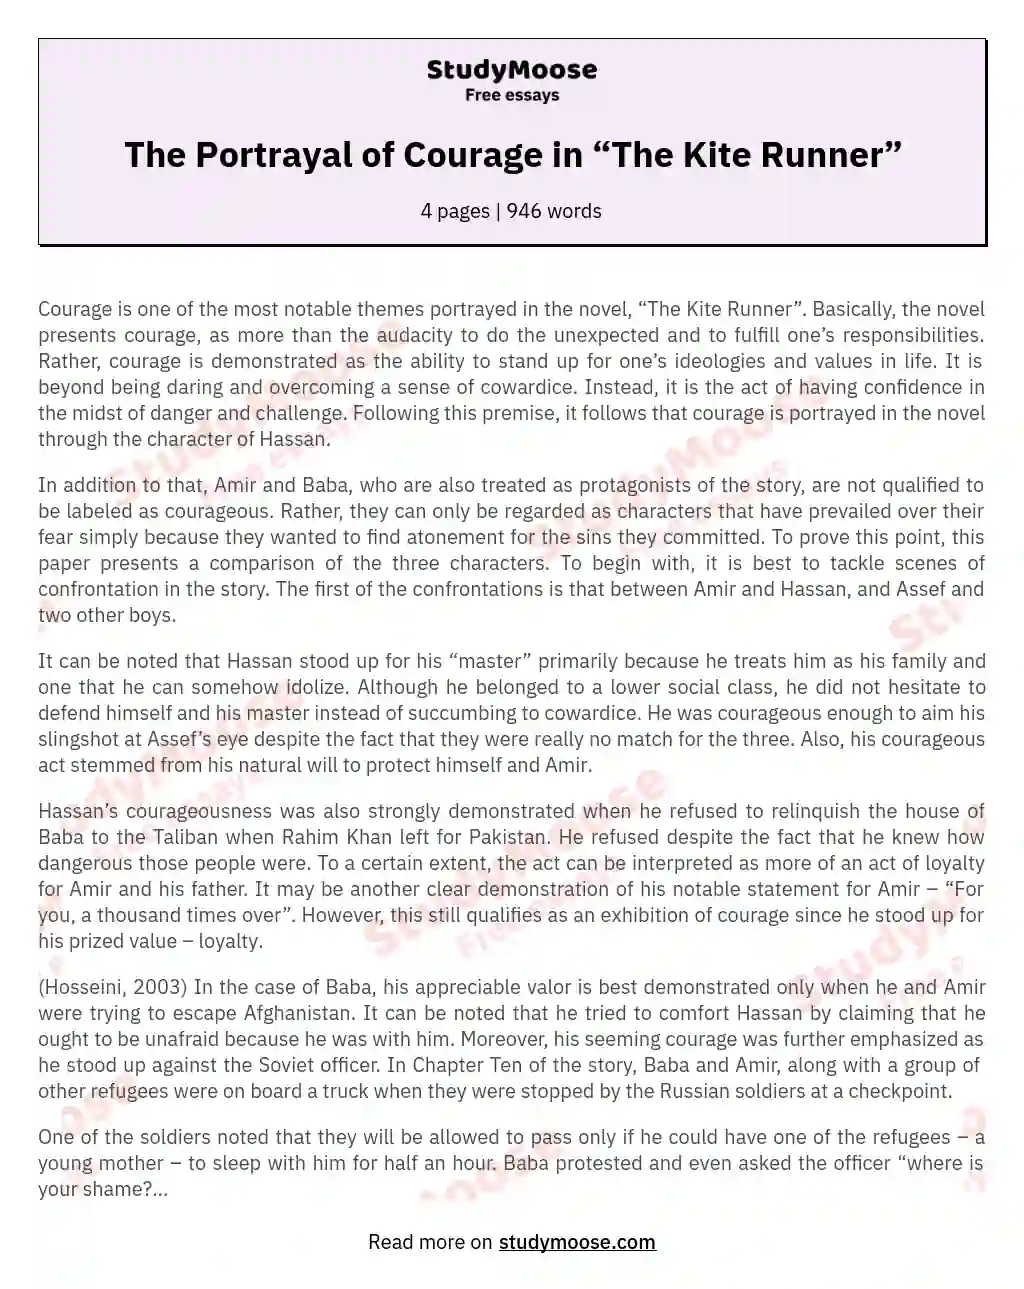 The Portrayal of Courage in “The Kite Runner” essay